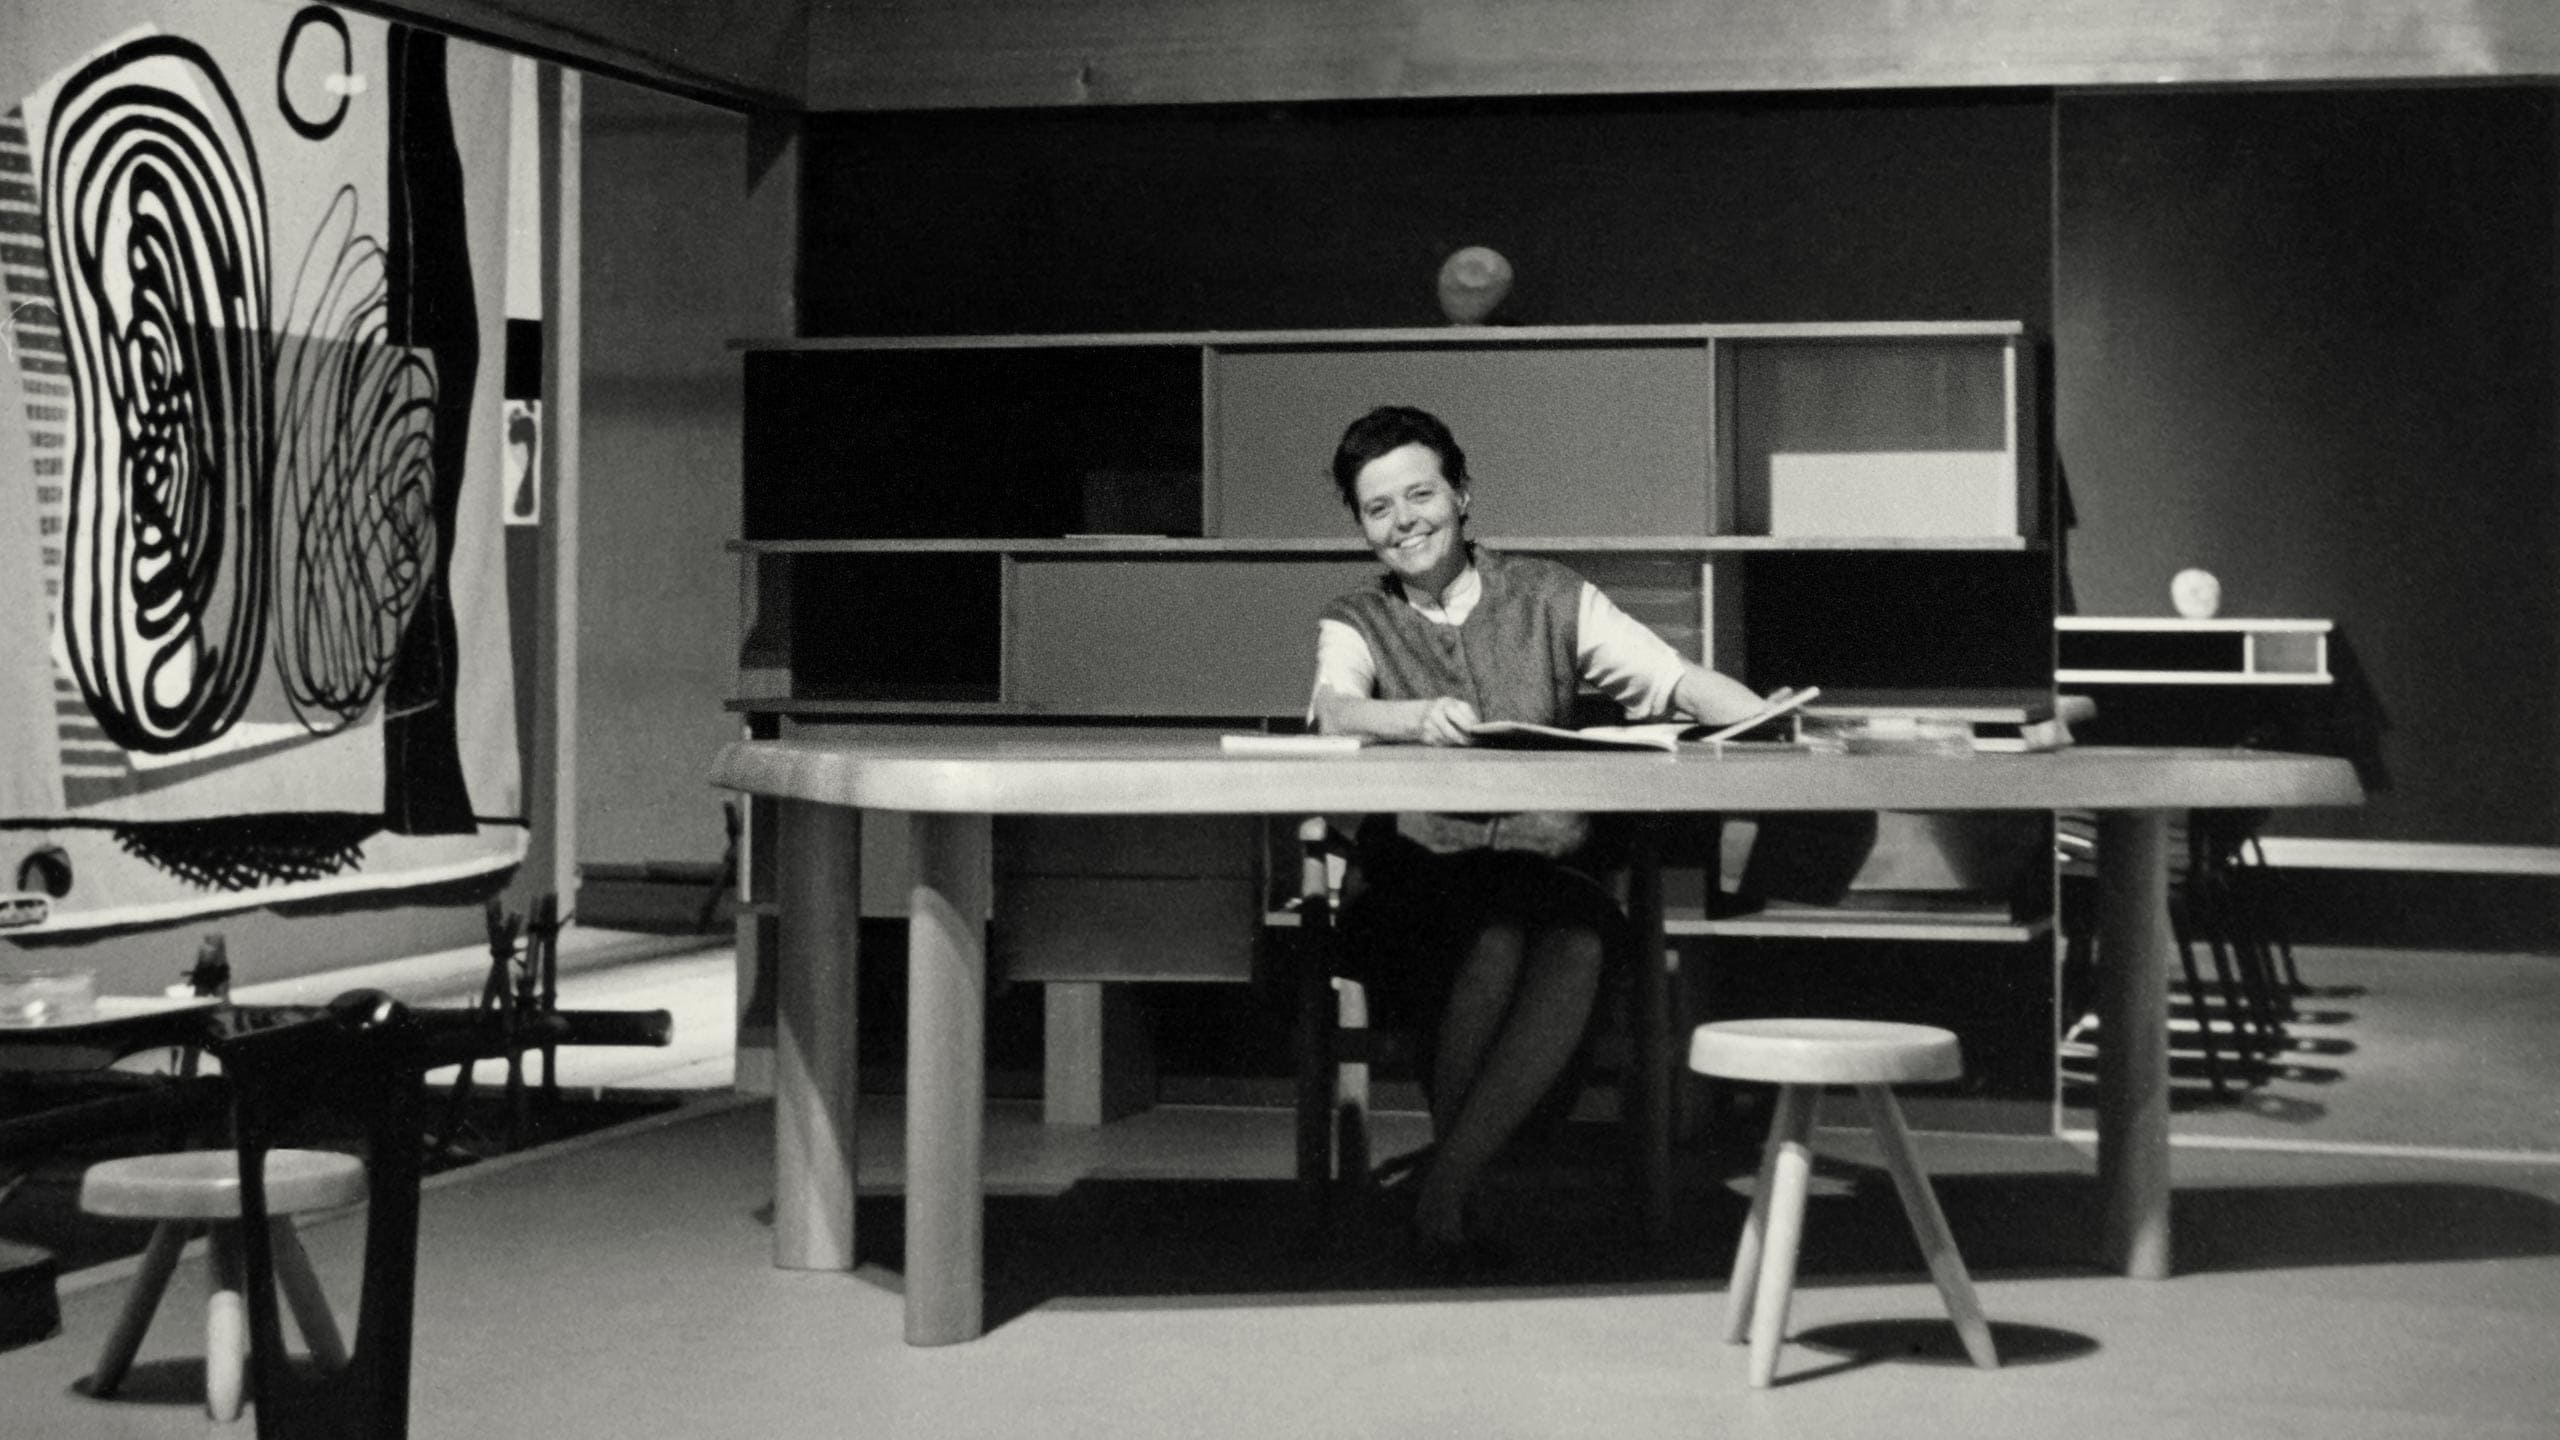 Charlotte Perriand posing for a picture whilst working at a table.